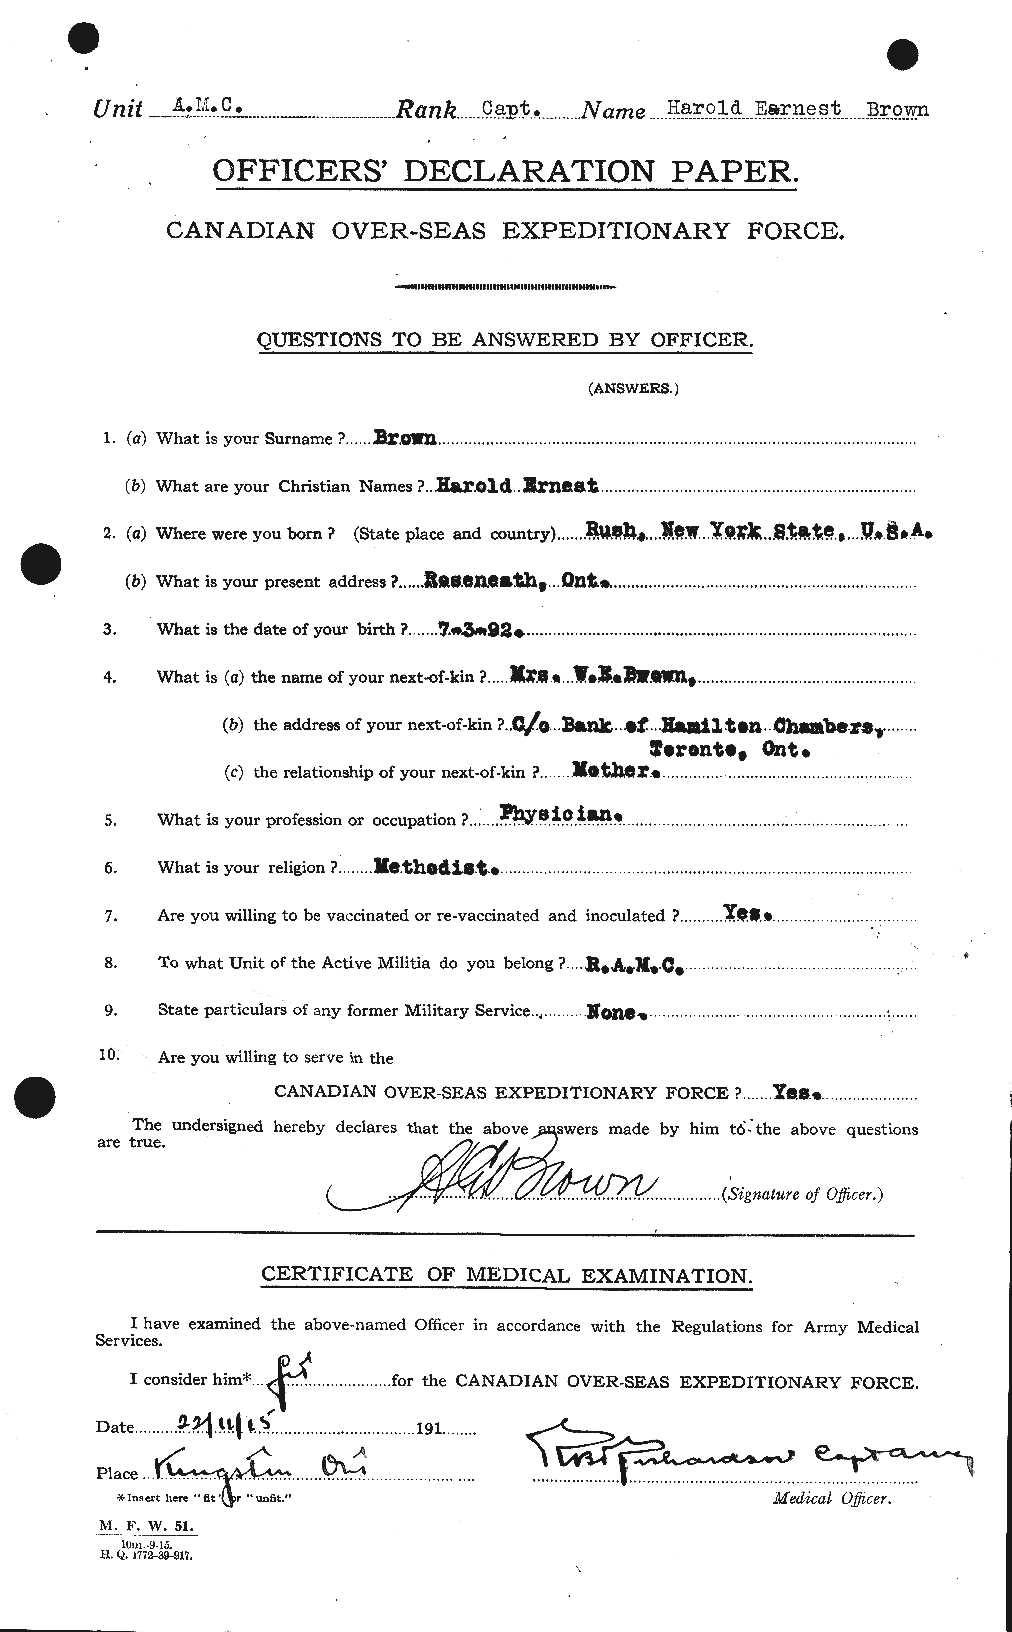 Personnel Records of the First World War - CEF 265357a